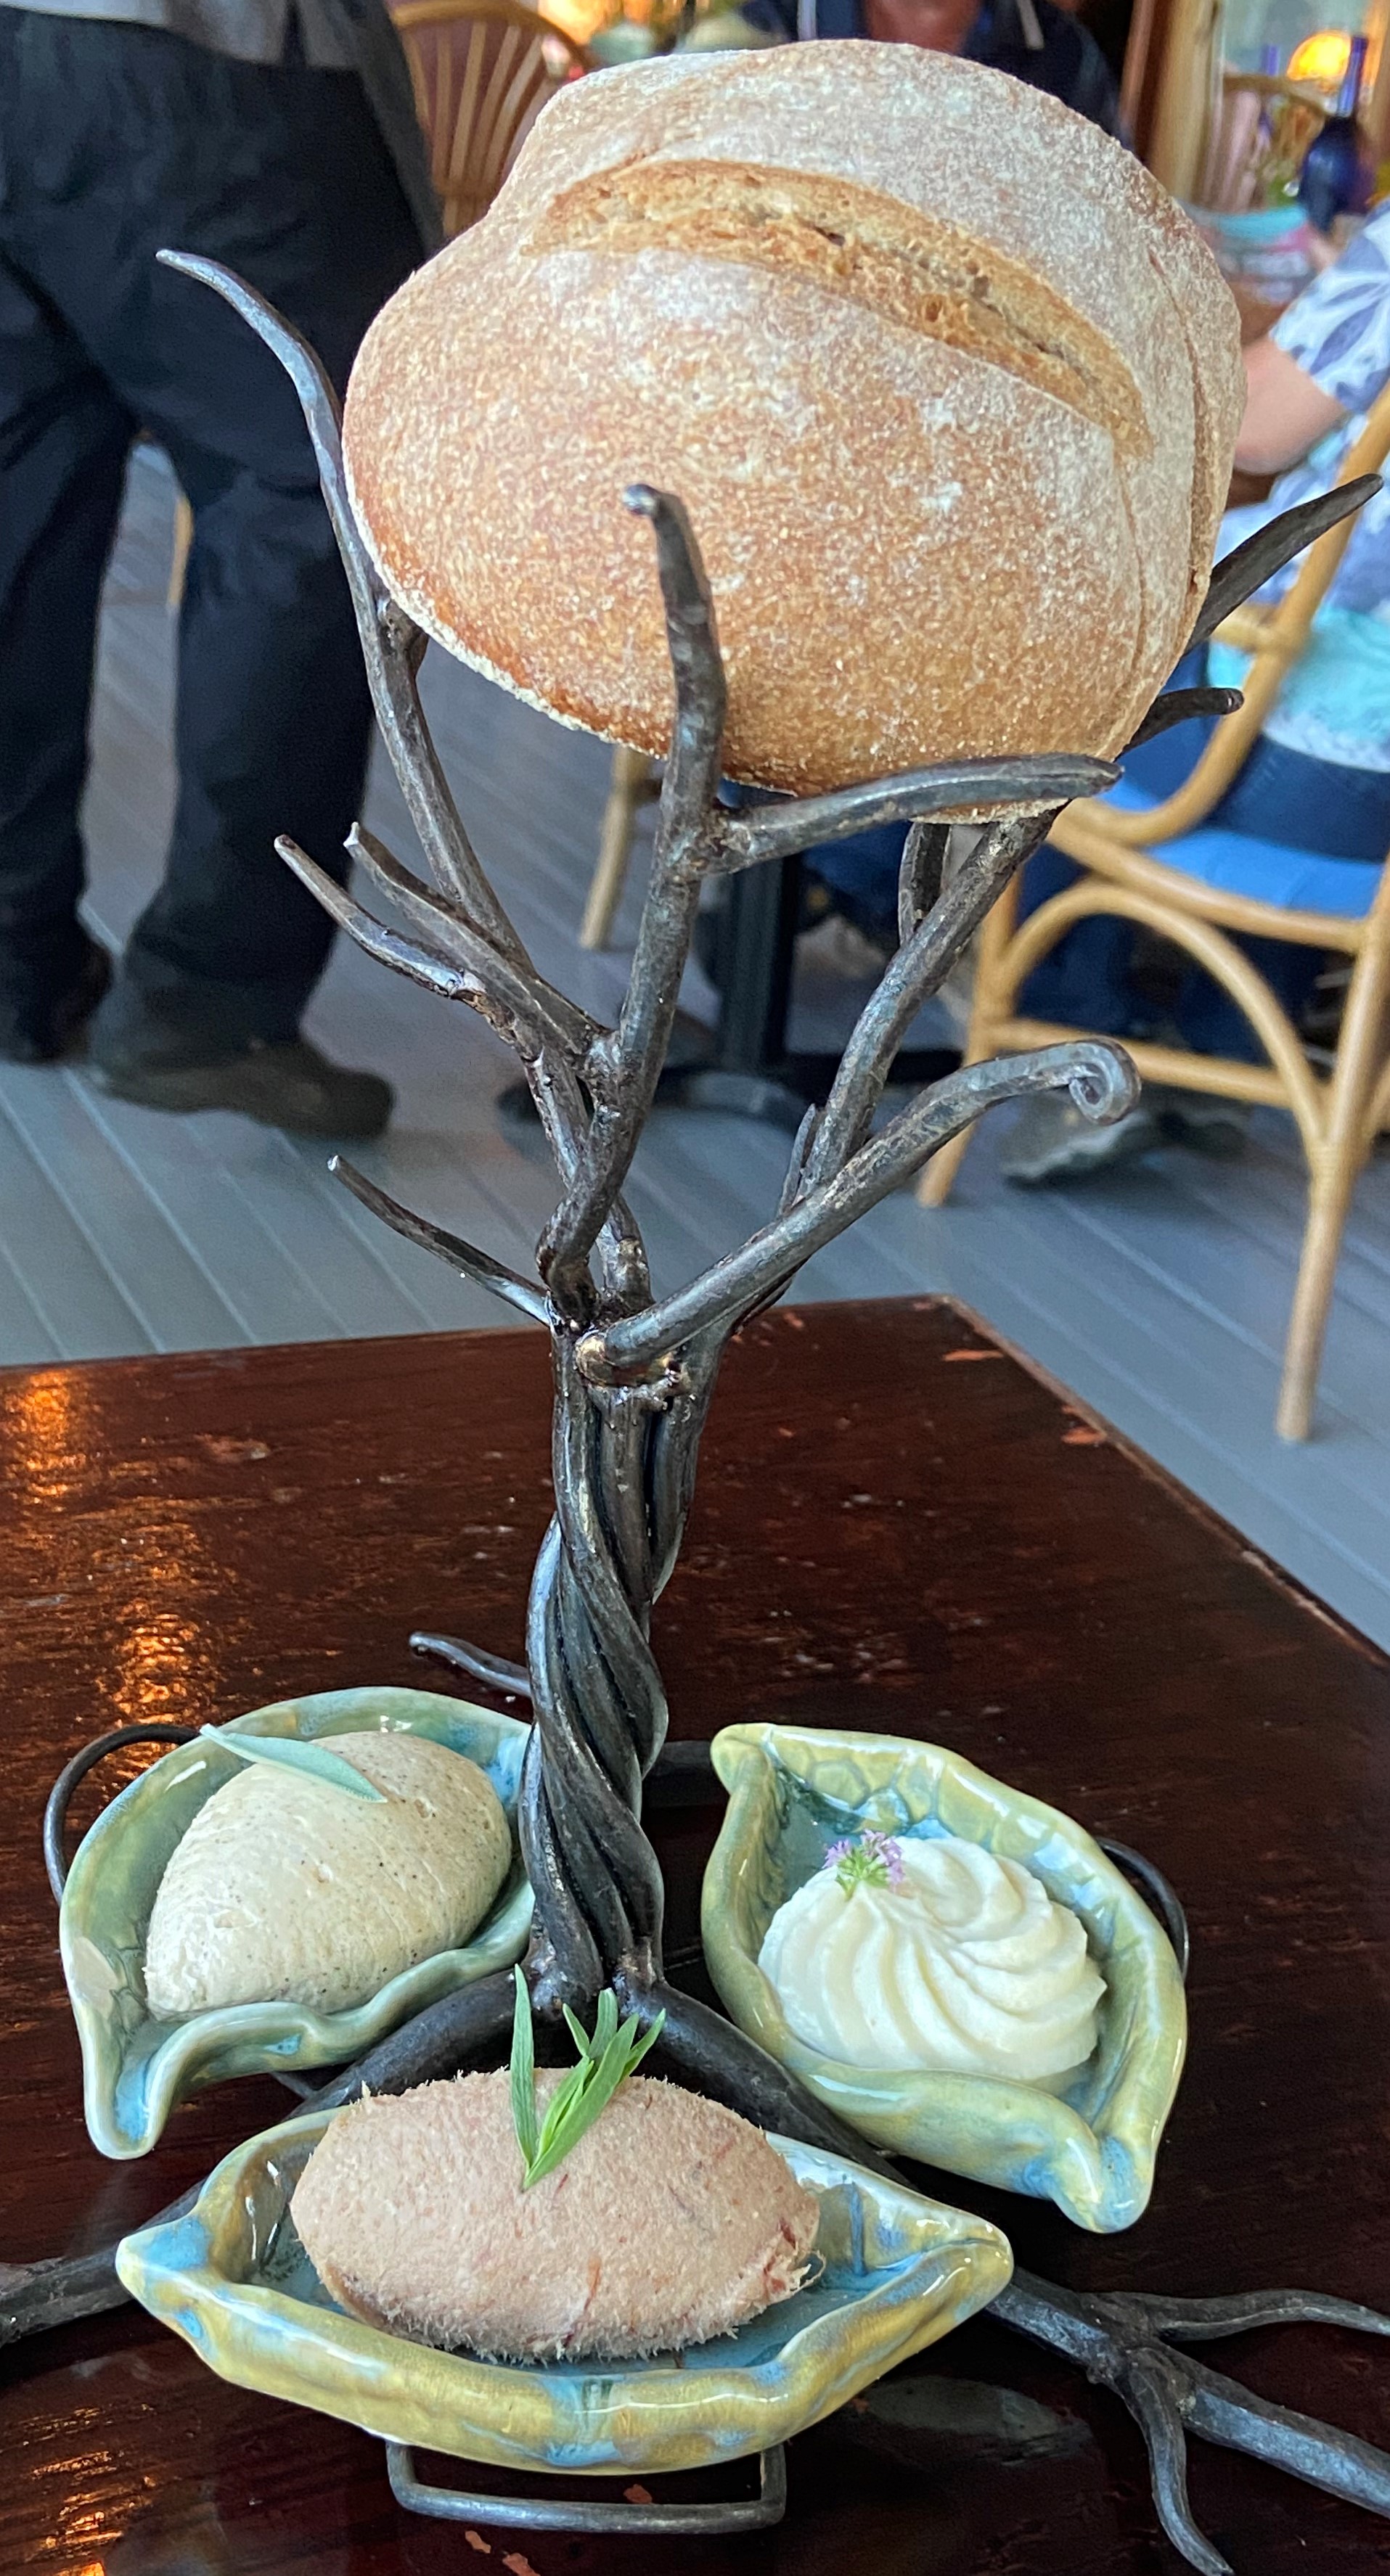 Sourdough bread in an iron tree with spreads